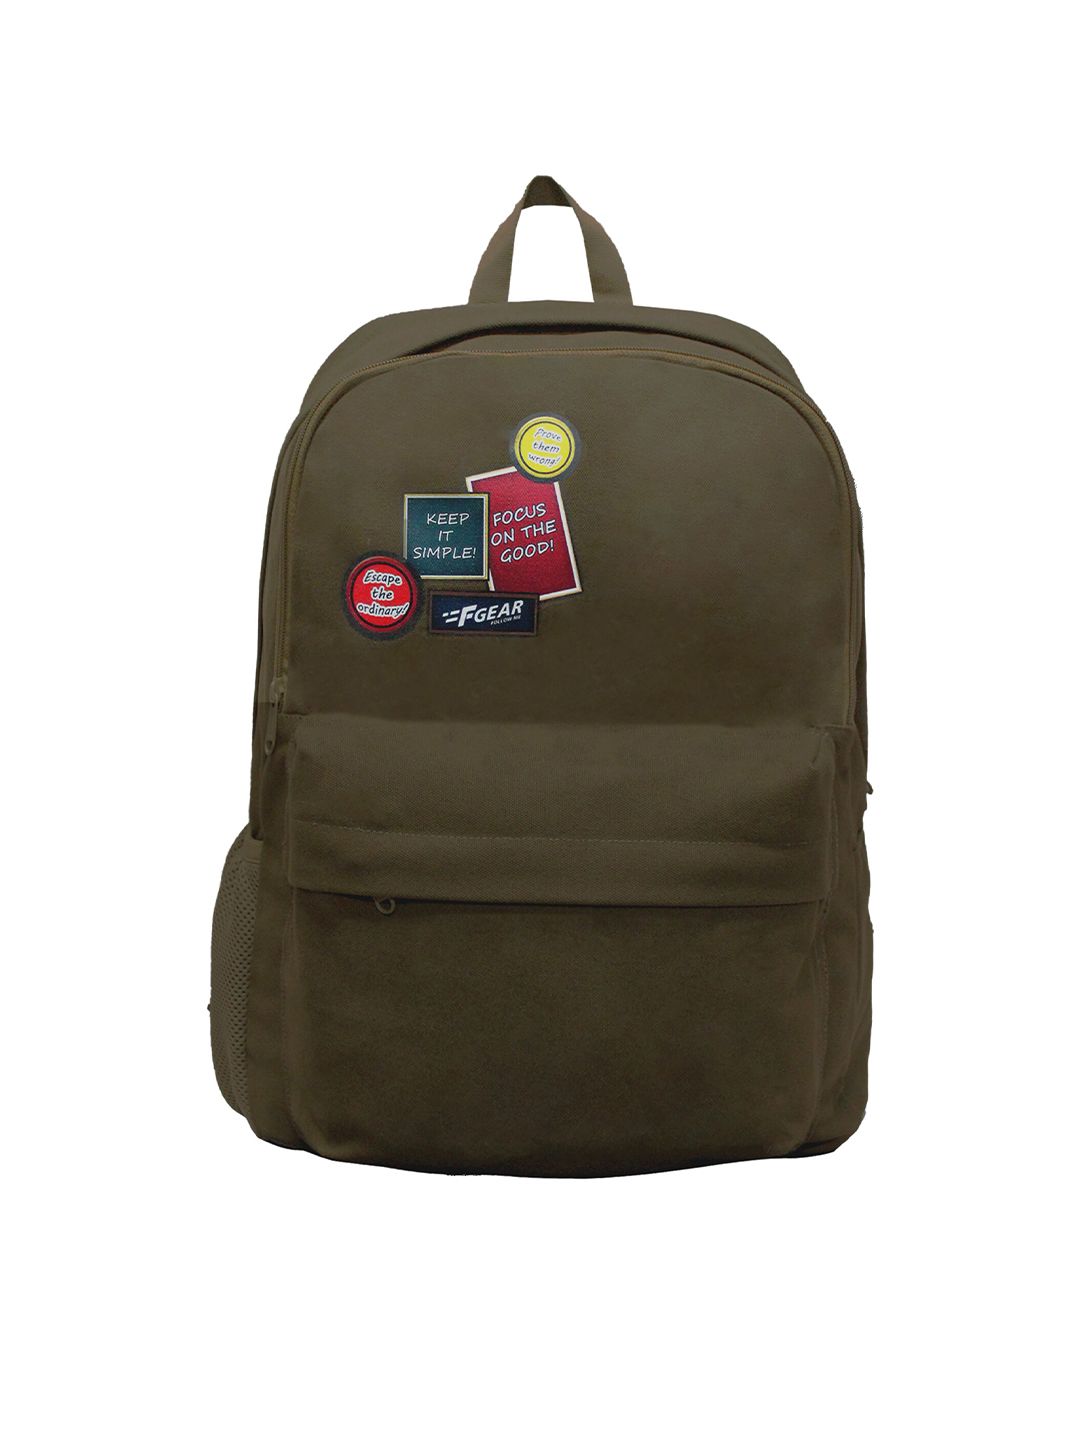 F Gear Unisex Green Backpack Price in India